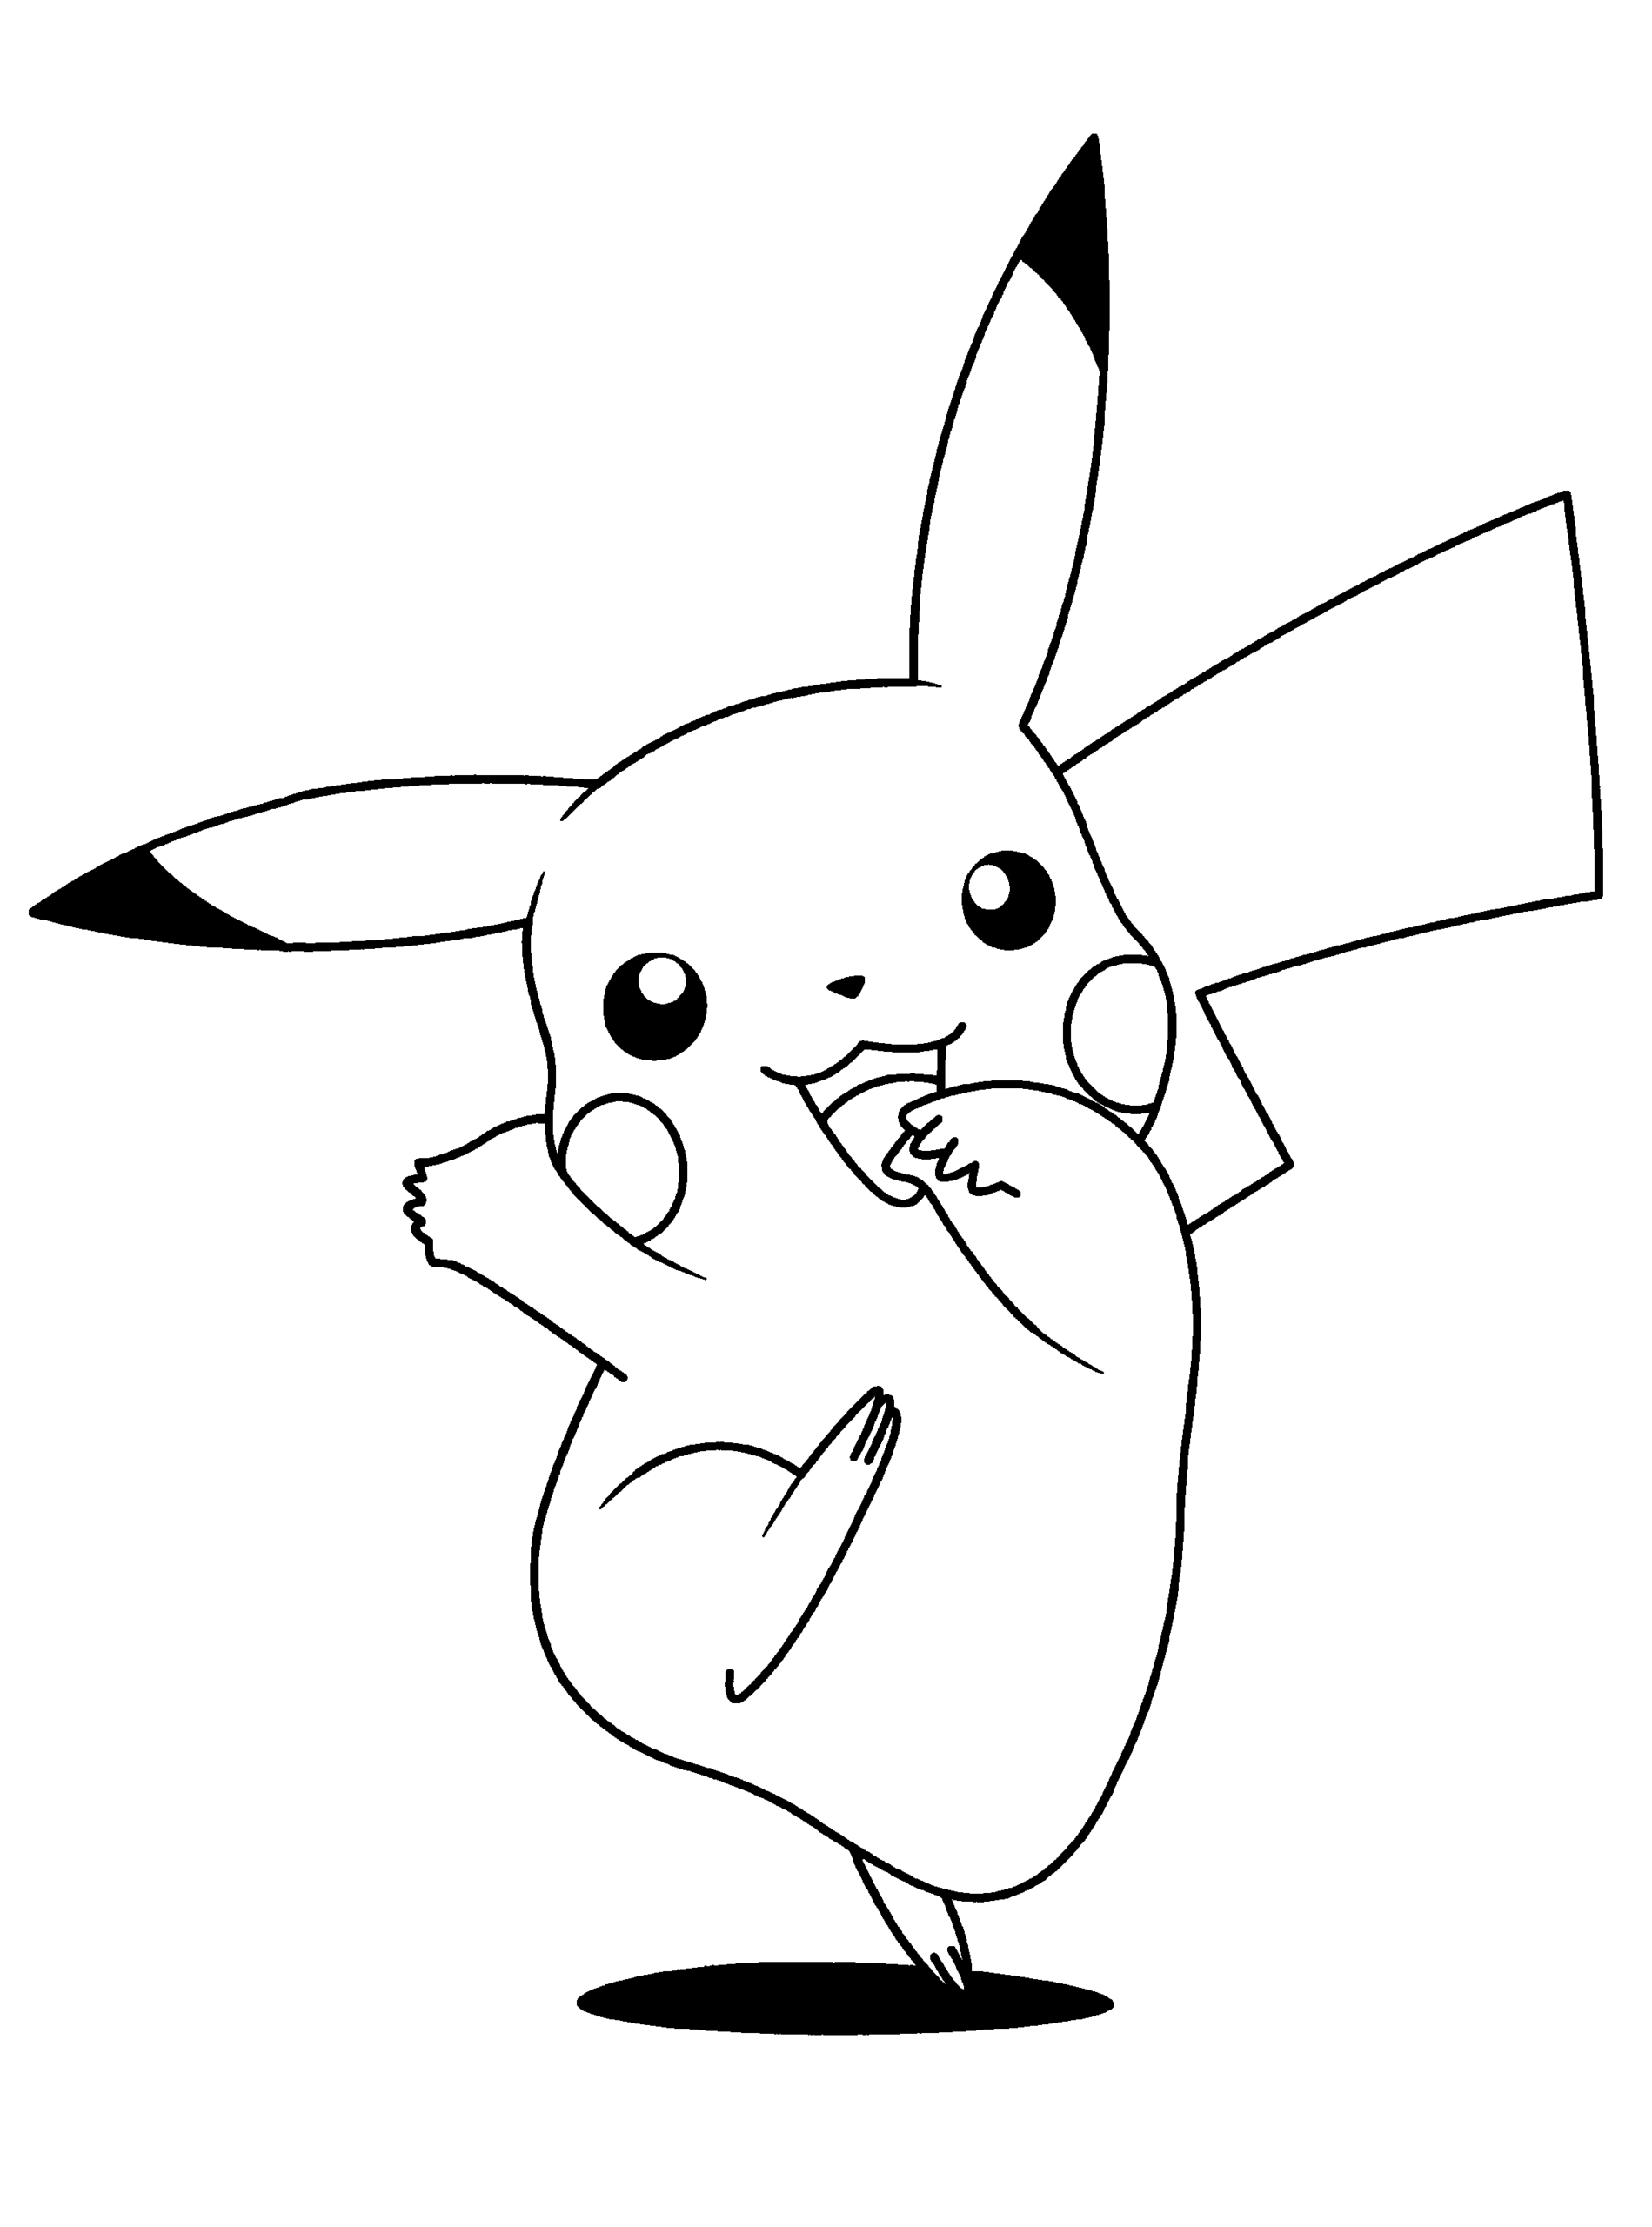 Pikachu Printable Coloring Pages Anime 1531790828_pikachu dancing a4 2021 0930 Coloring4free